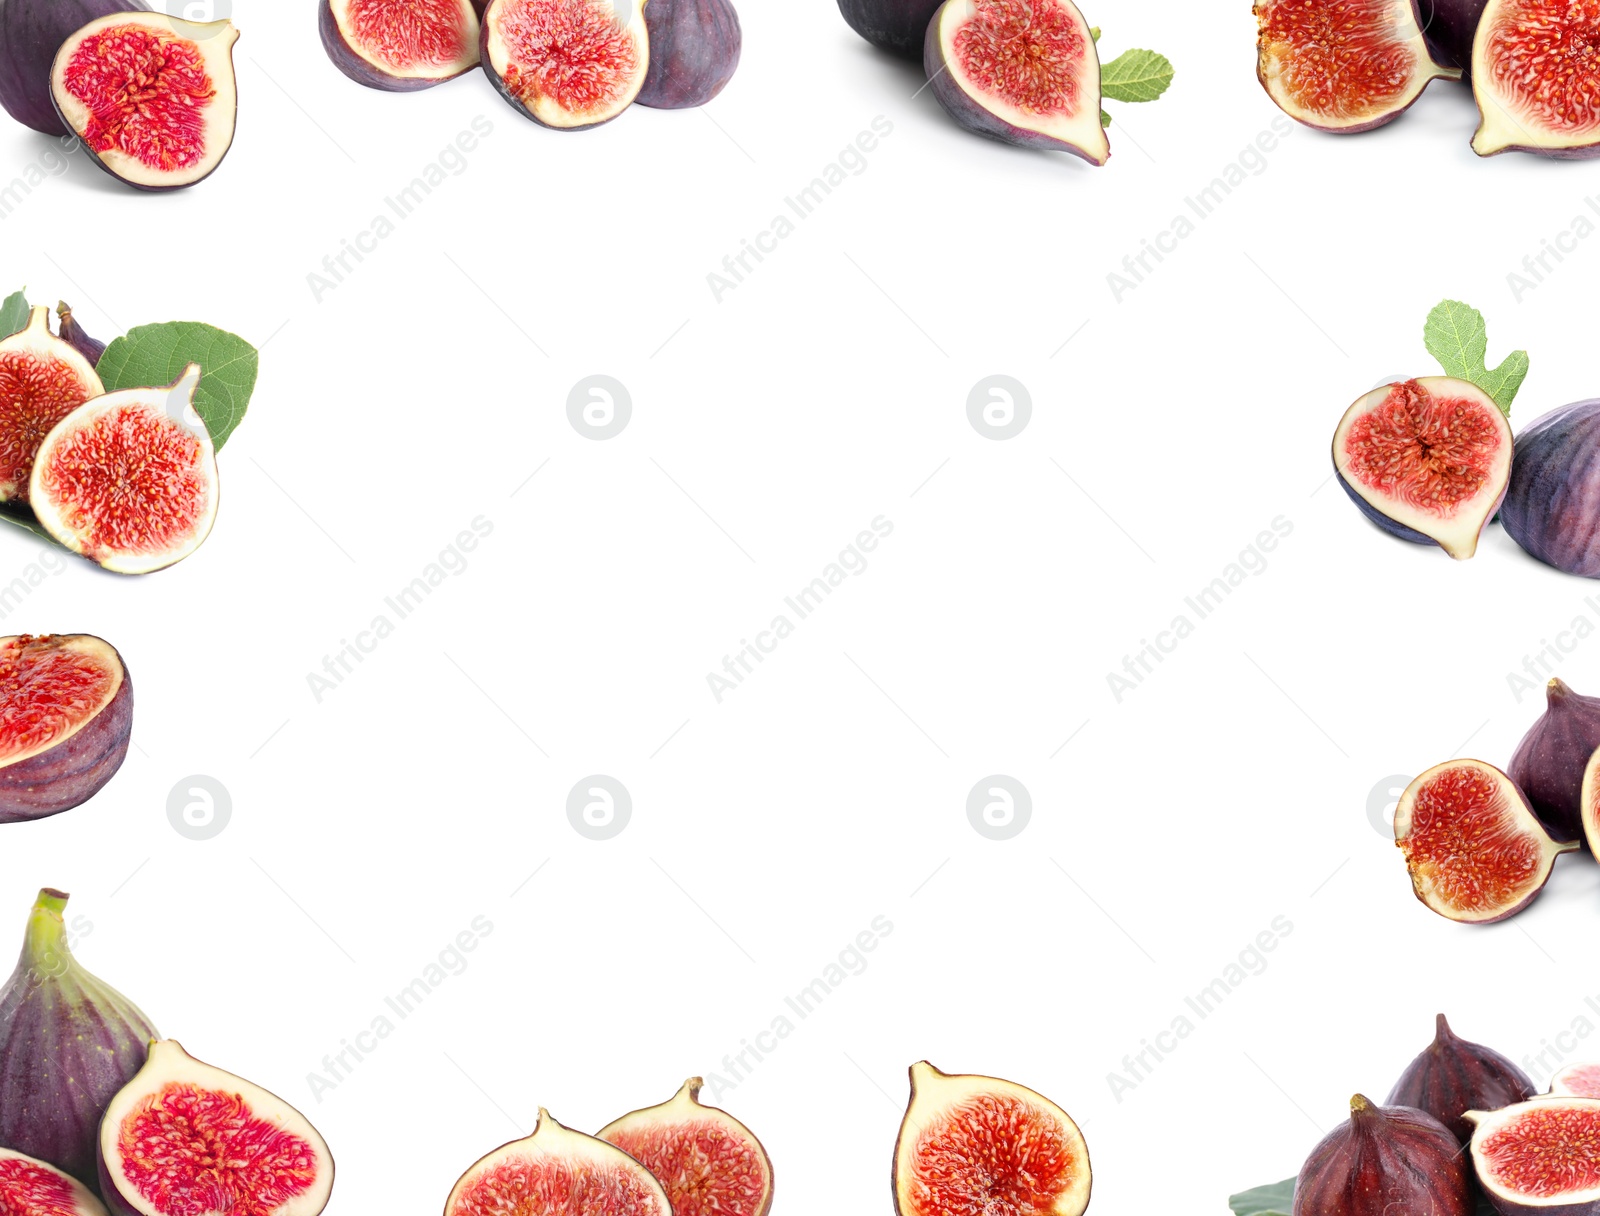 Image of Frame of ripe figs on white background